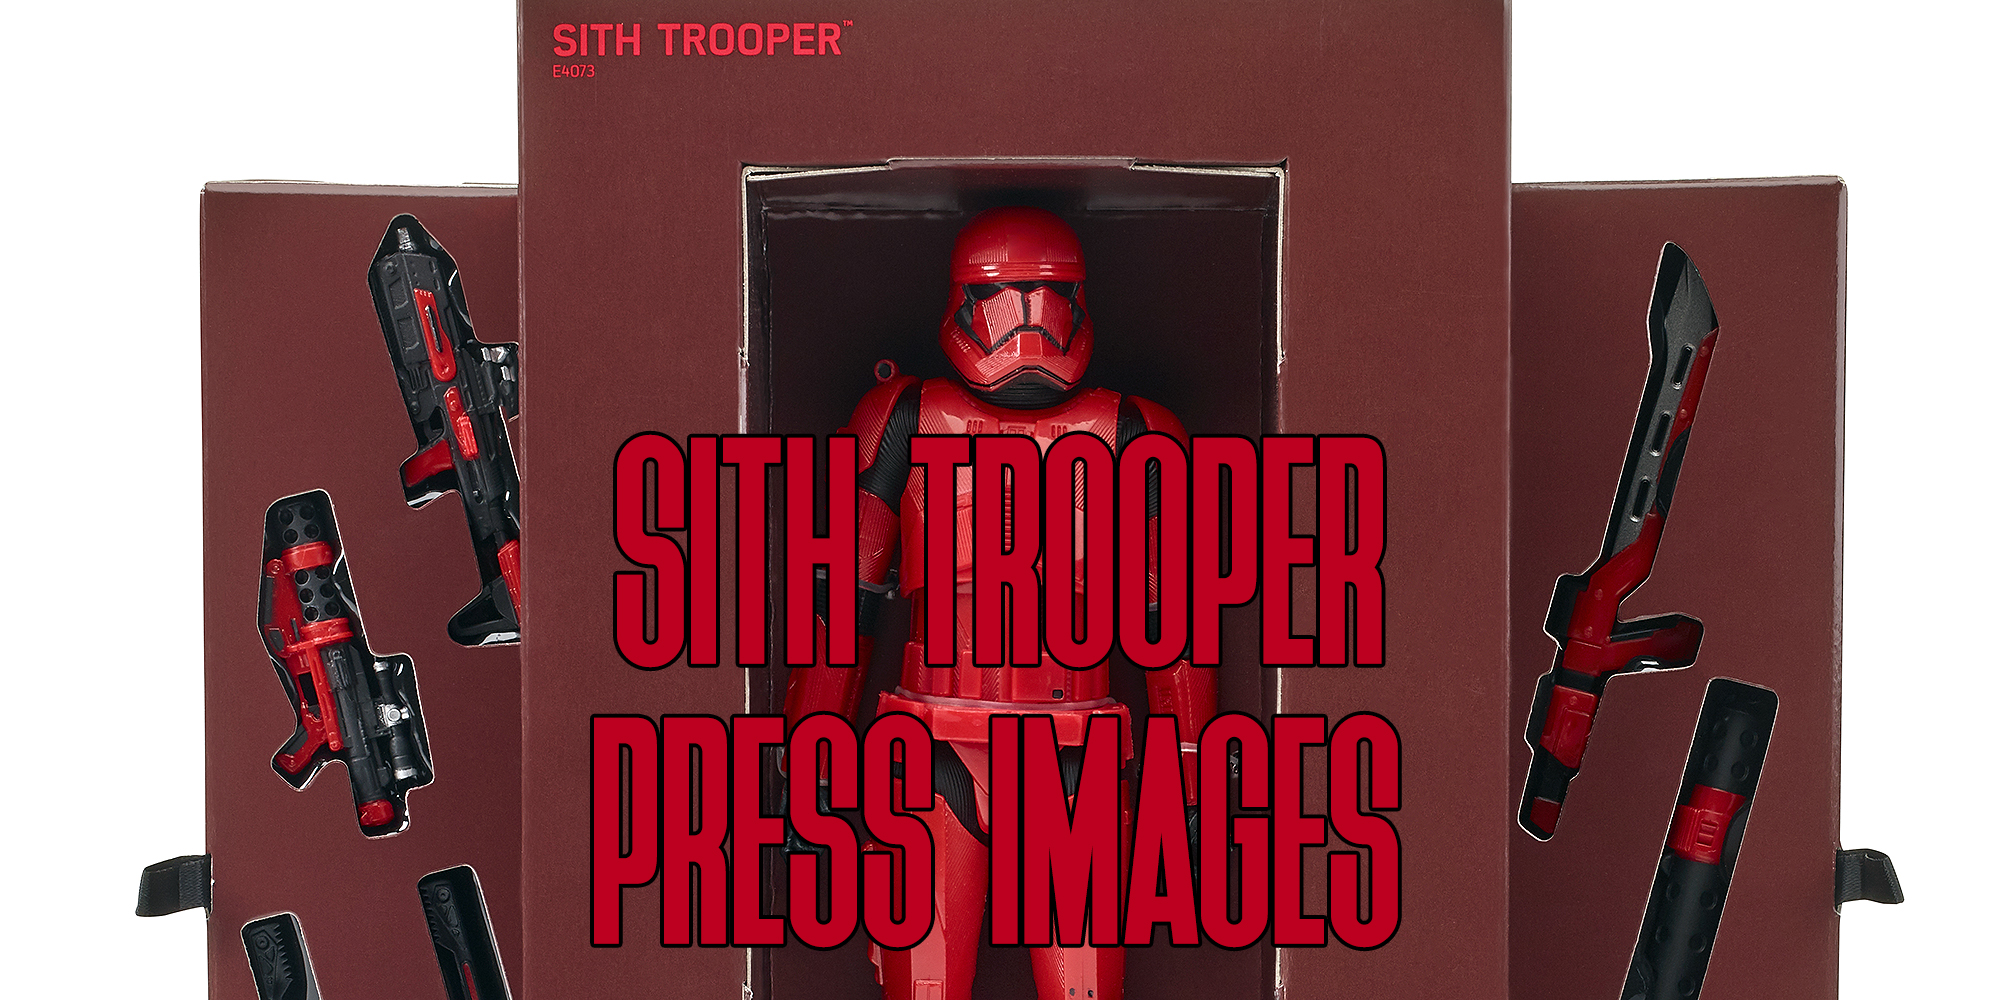 Sith Trooper - Press Images